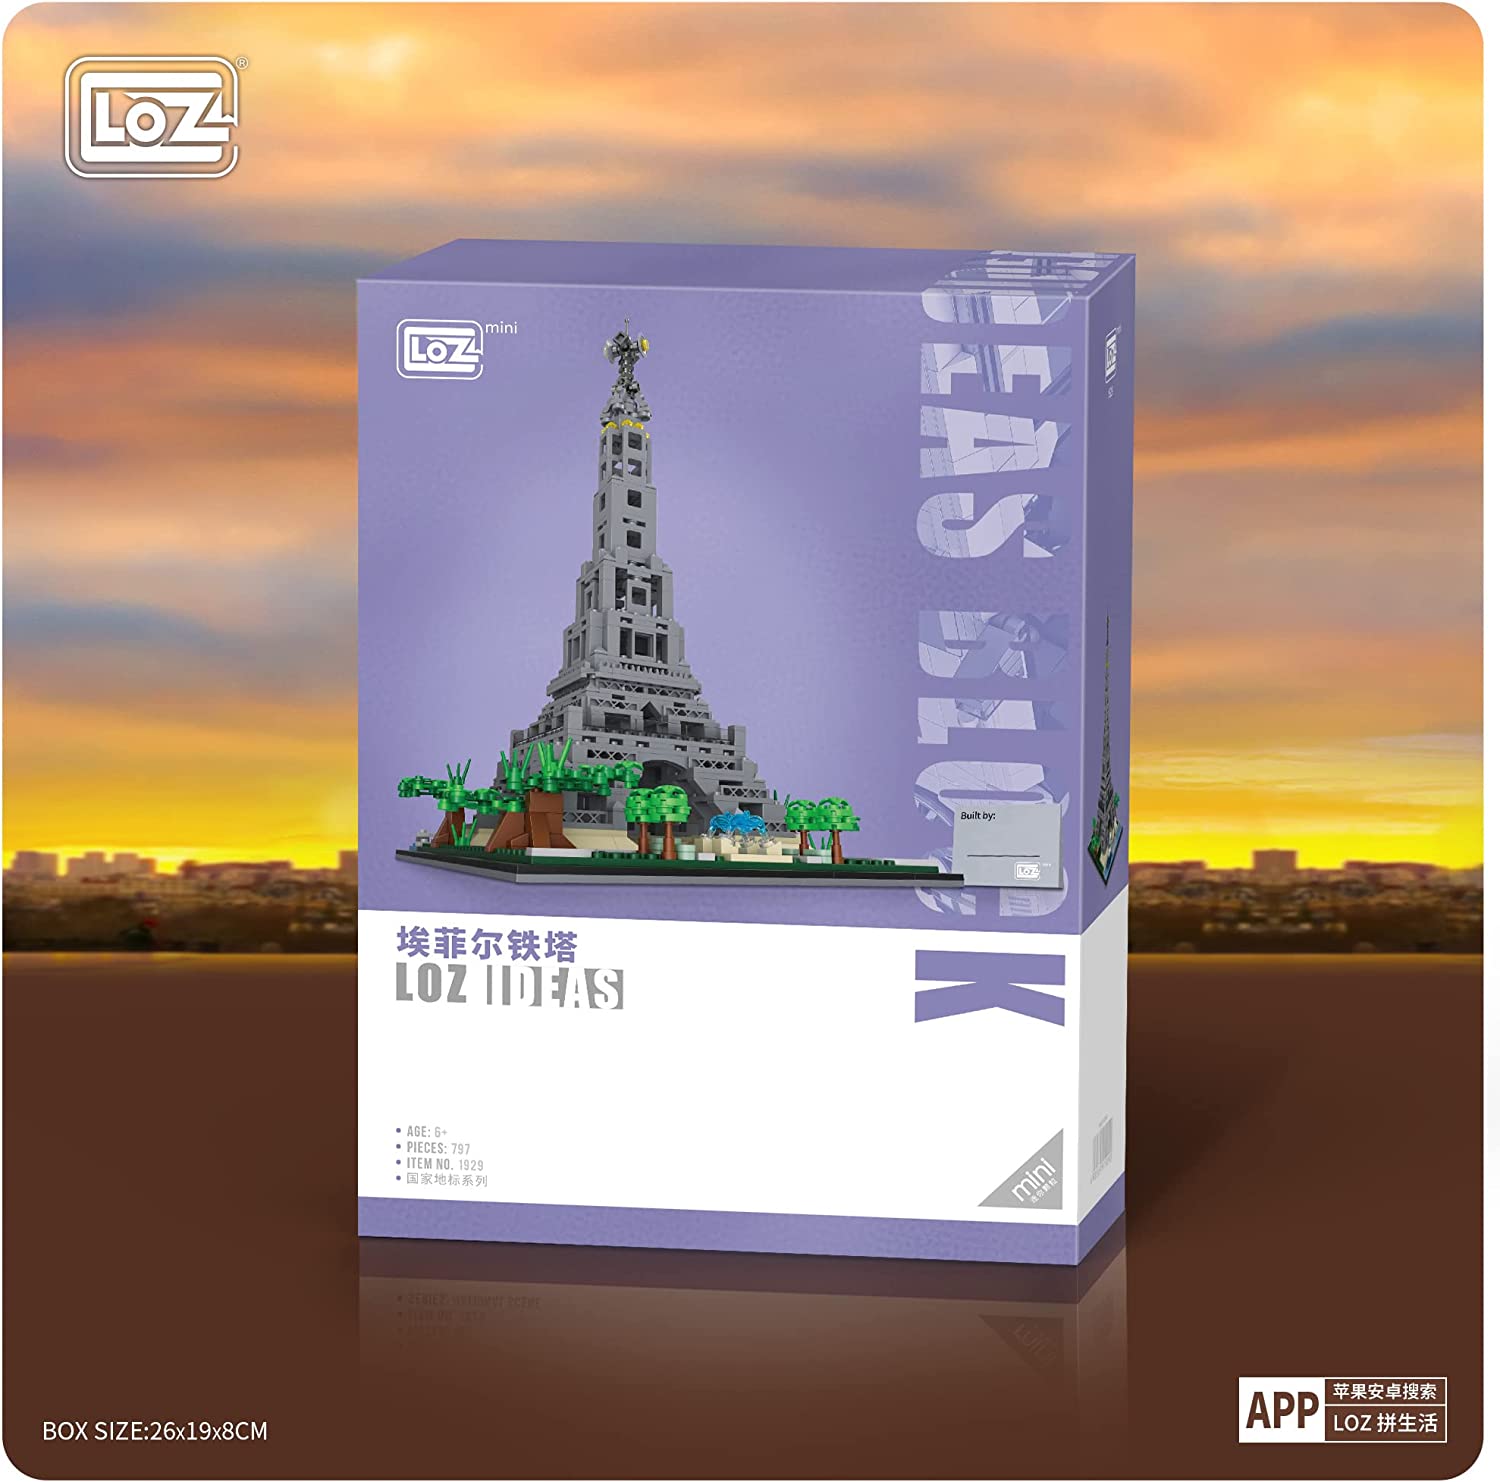 LOZ Micro Mini Blocks Eiffel Tower Building and Architecture Model Set,797 Piece Mini Bricks Toy,Famous Architecture Toys Gifts for Kid and Adult